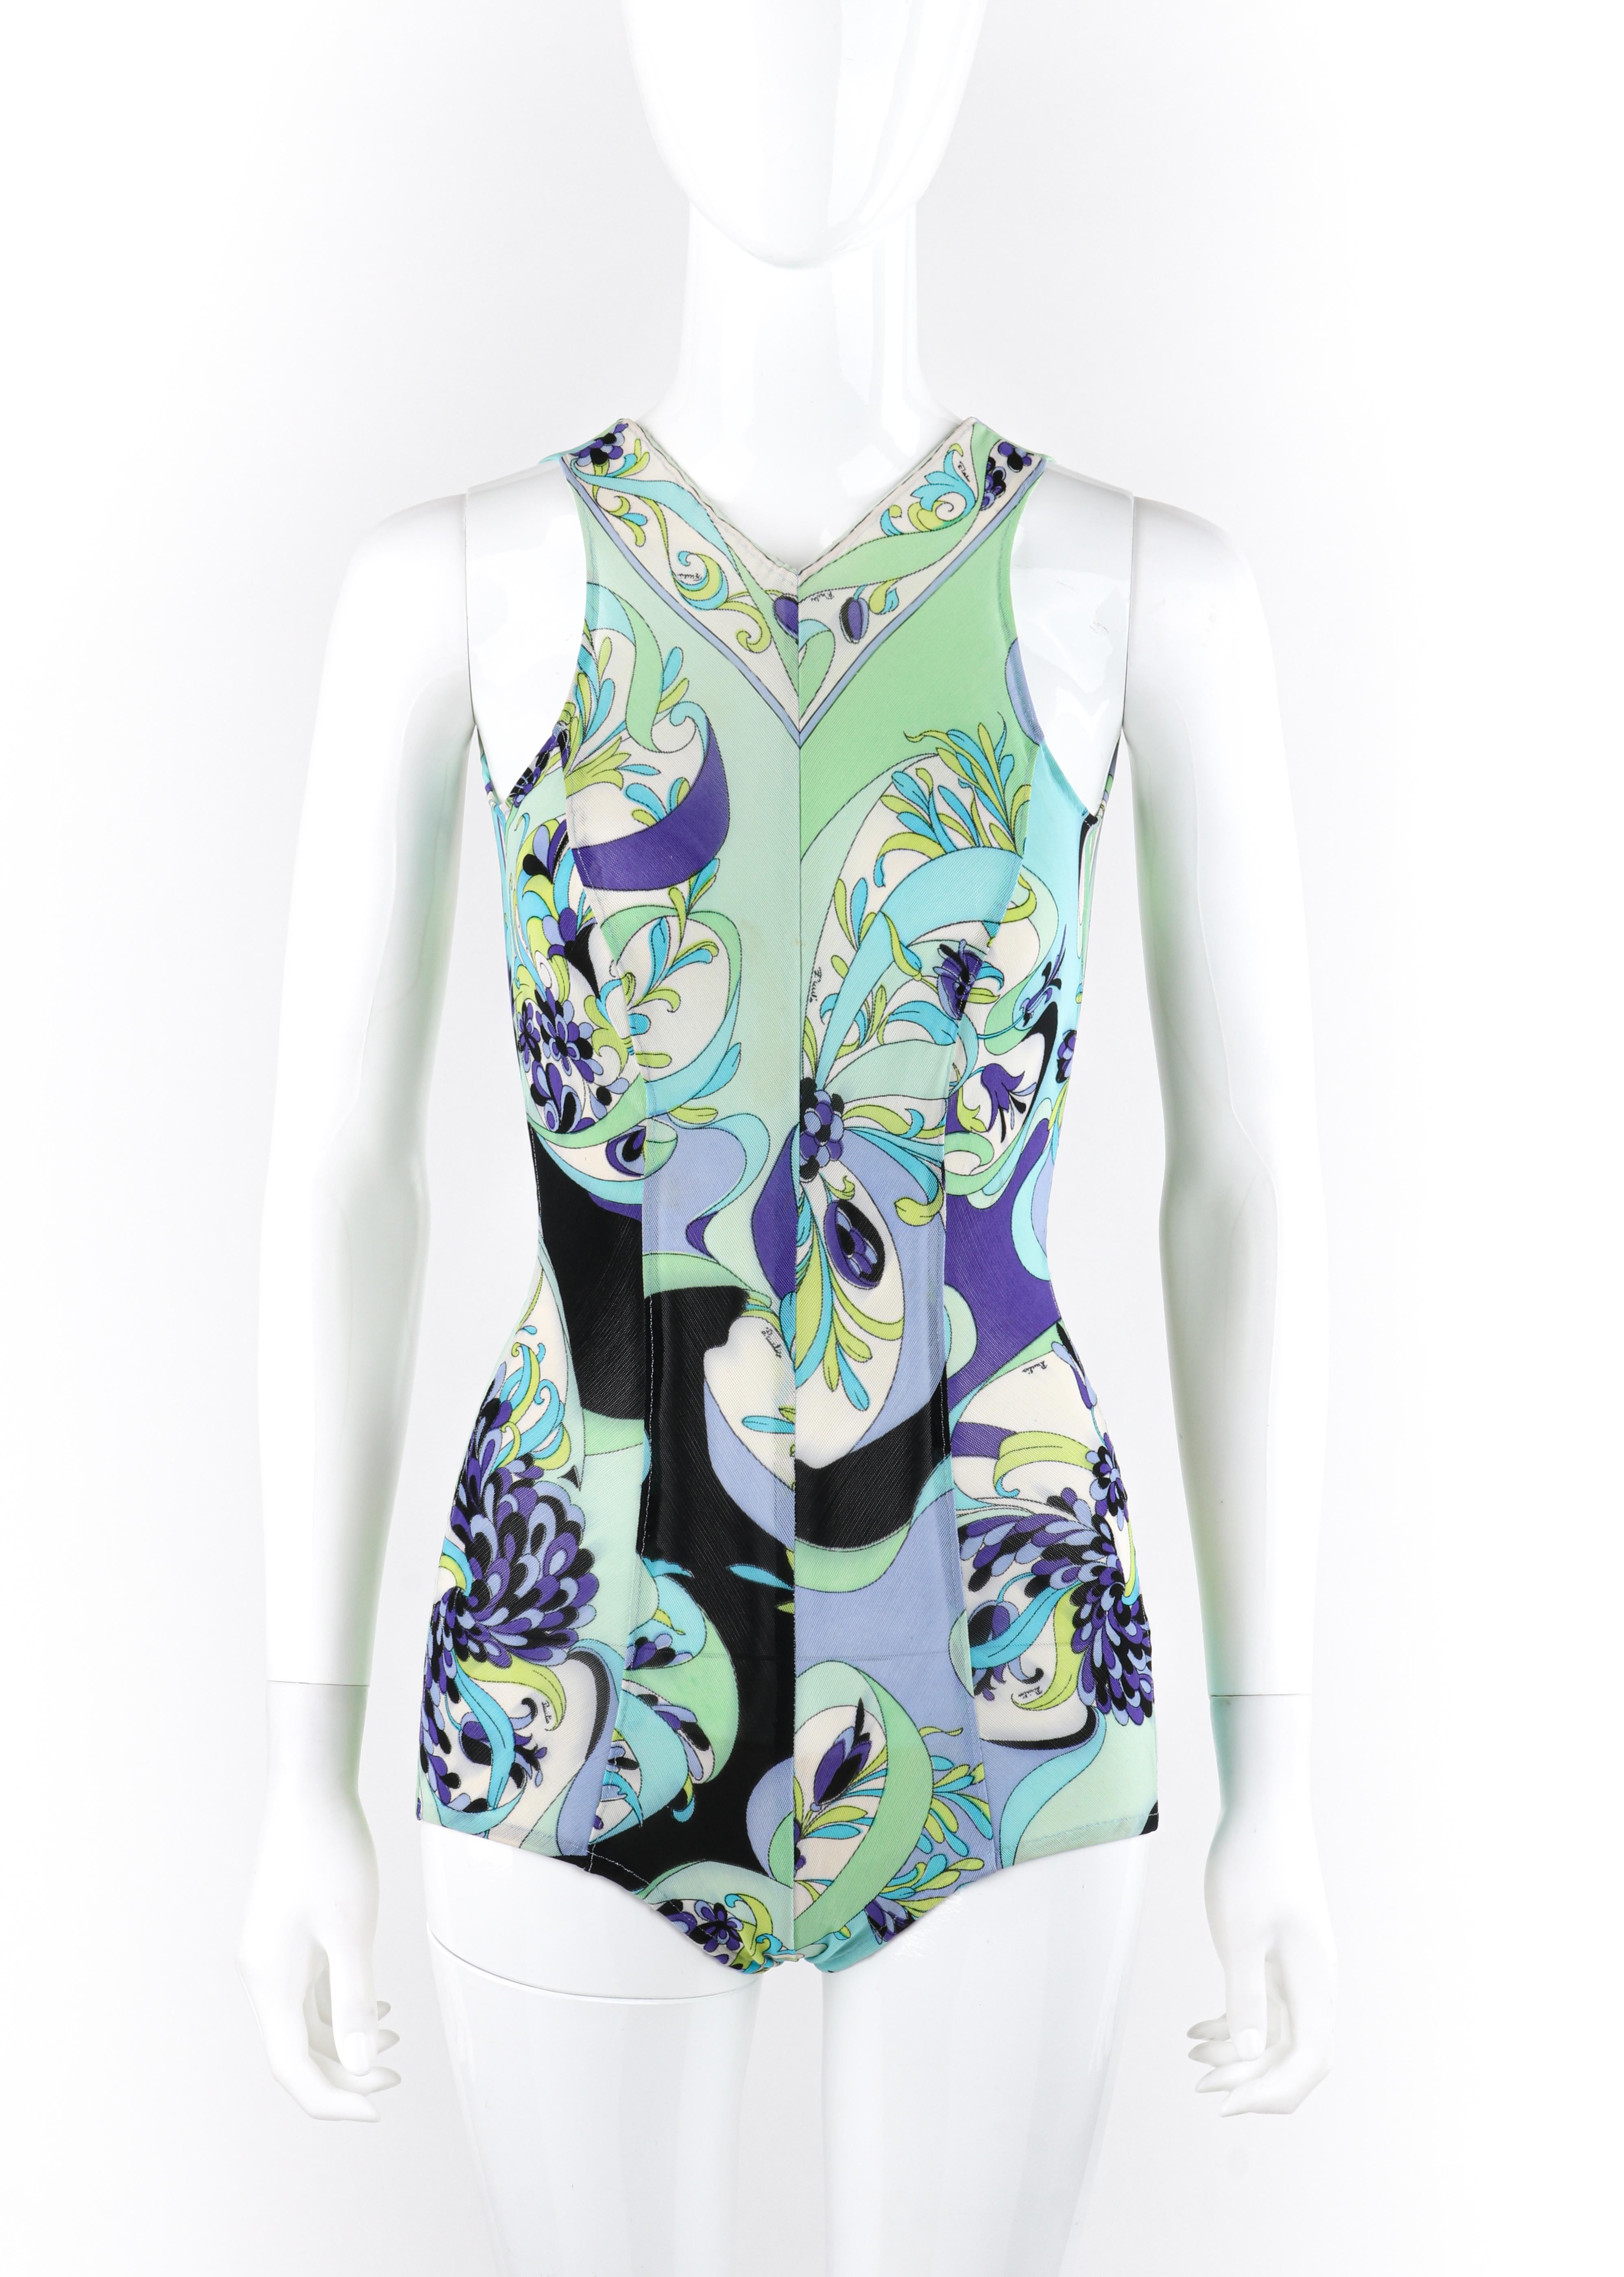 EMILIO PUCCI c.1960s Multicolor Signature Floral Mesh One Piece Bathing Swimsuit
Circa: 1960s 
Label(s): Emilio Pucci, Exclusively for Saks Fifth Avenue
Designer: Emilio Pucci
Style: One-piece swimsuit
Color(s): Shades of blue, purple, green, black,